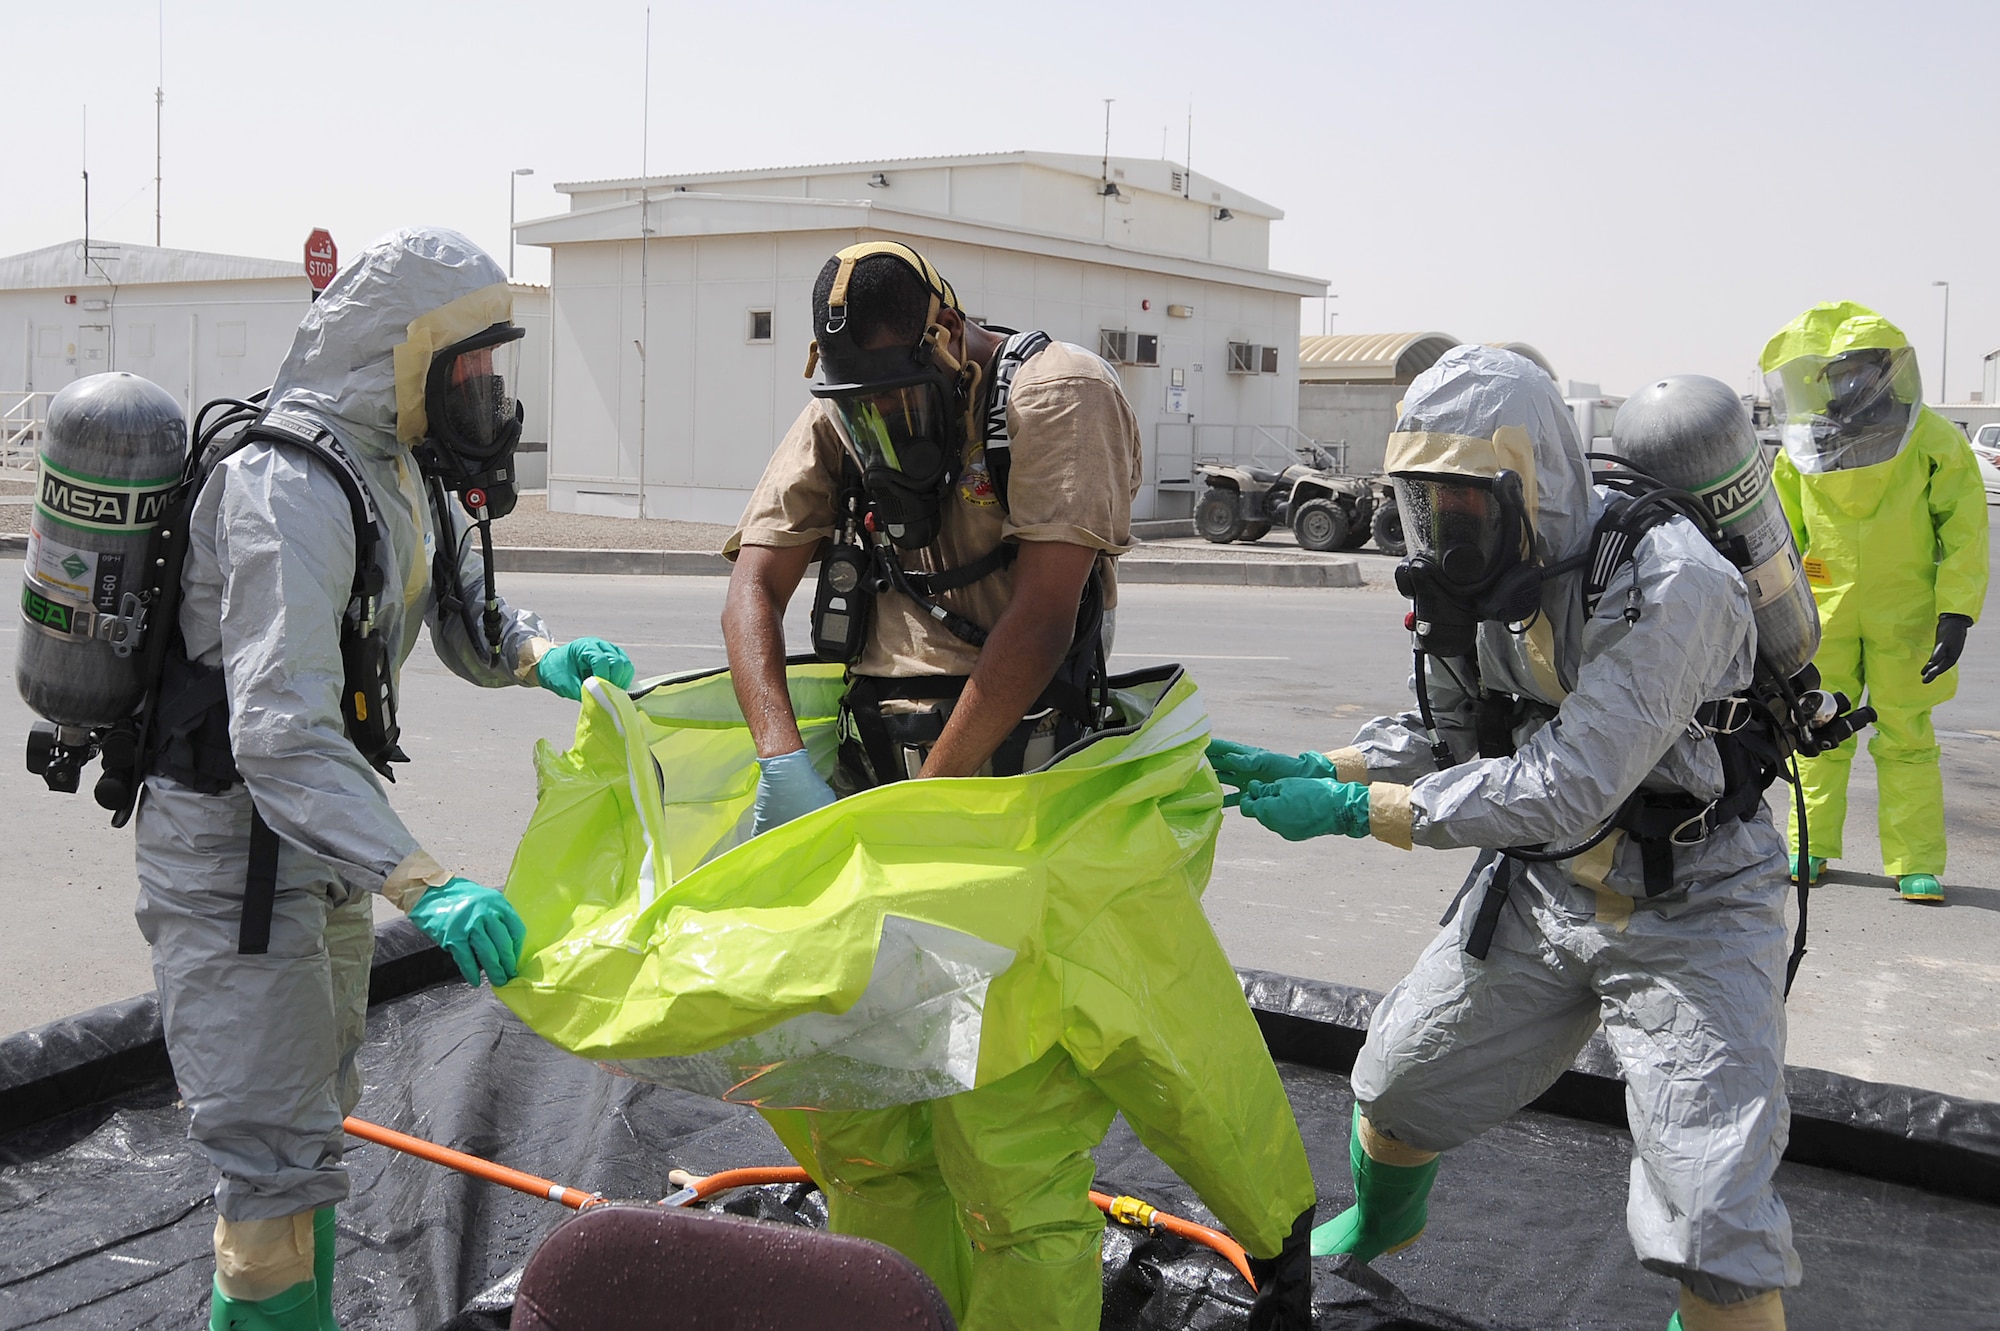 Staff Sgt. Jontae Wallace is assisted out of a Level-A hazmat suit by Master Sgt. Jason Golden and Staff Sgt. Bobo during hazmat decontamination training, May 2 at an undisclosed location in Southwest Asia. All three Airmen are with the 380th Expeditionary Civil Engineer Squadron Readiness and Emergency Management Flight. The flight performs Chemical, Biological, Radiological, and Nuclear (CBRN) detection and decontamination operations as well as emergency management command and control. (U.S. Air Force photo by Senior Airman Brian J. Ellis) (Released)